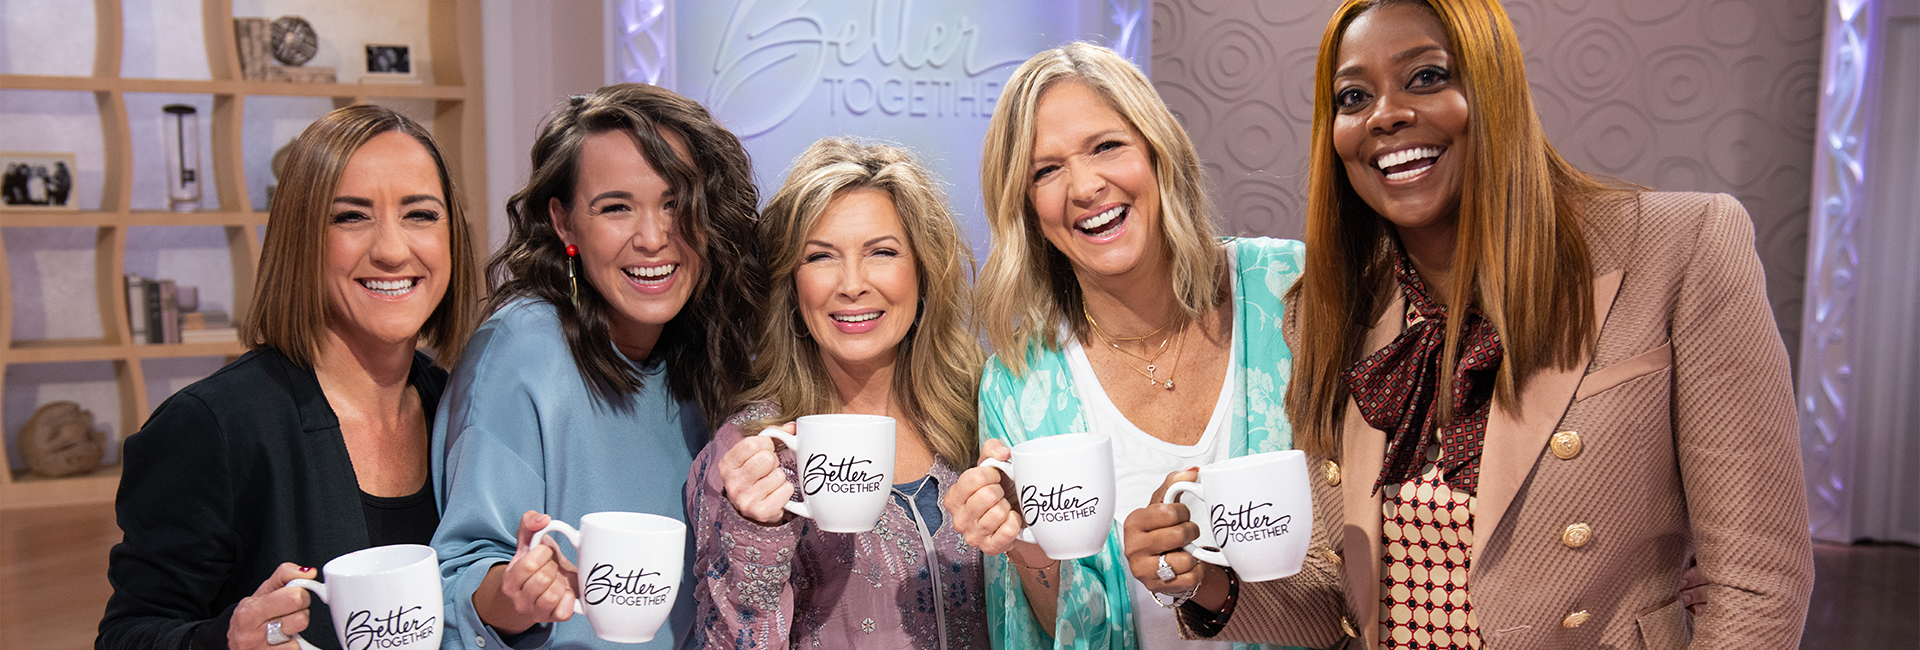 TBN Announces Its First-Ever Daily Program Made by Women, for Women -- 'Better Together' to Launch April 22